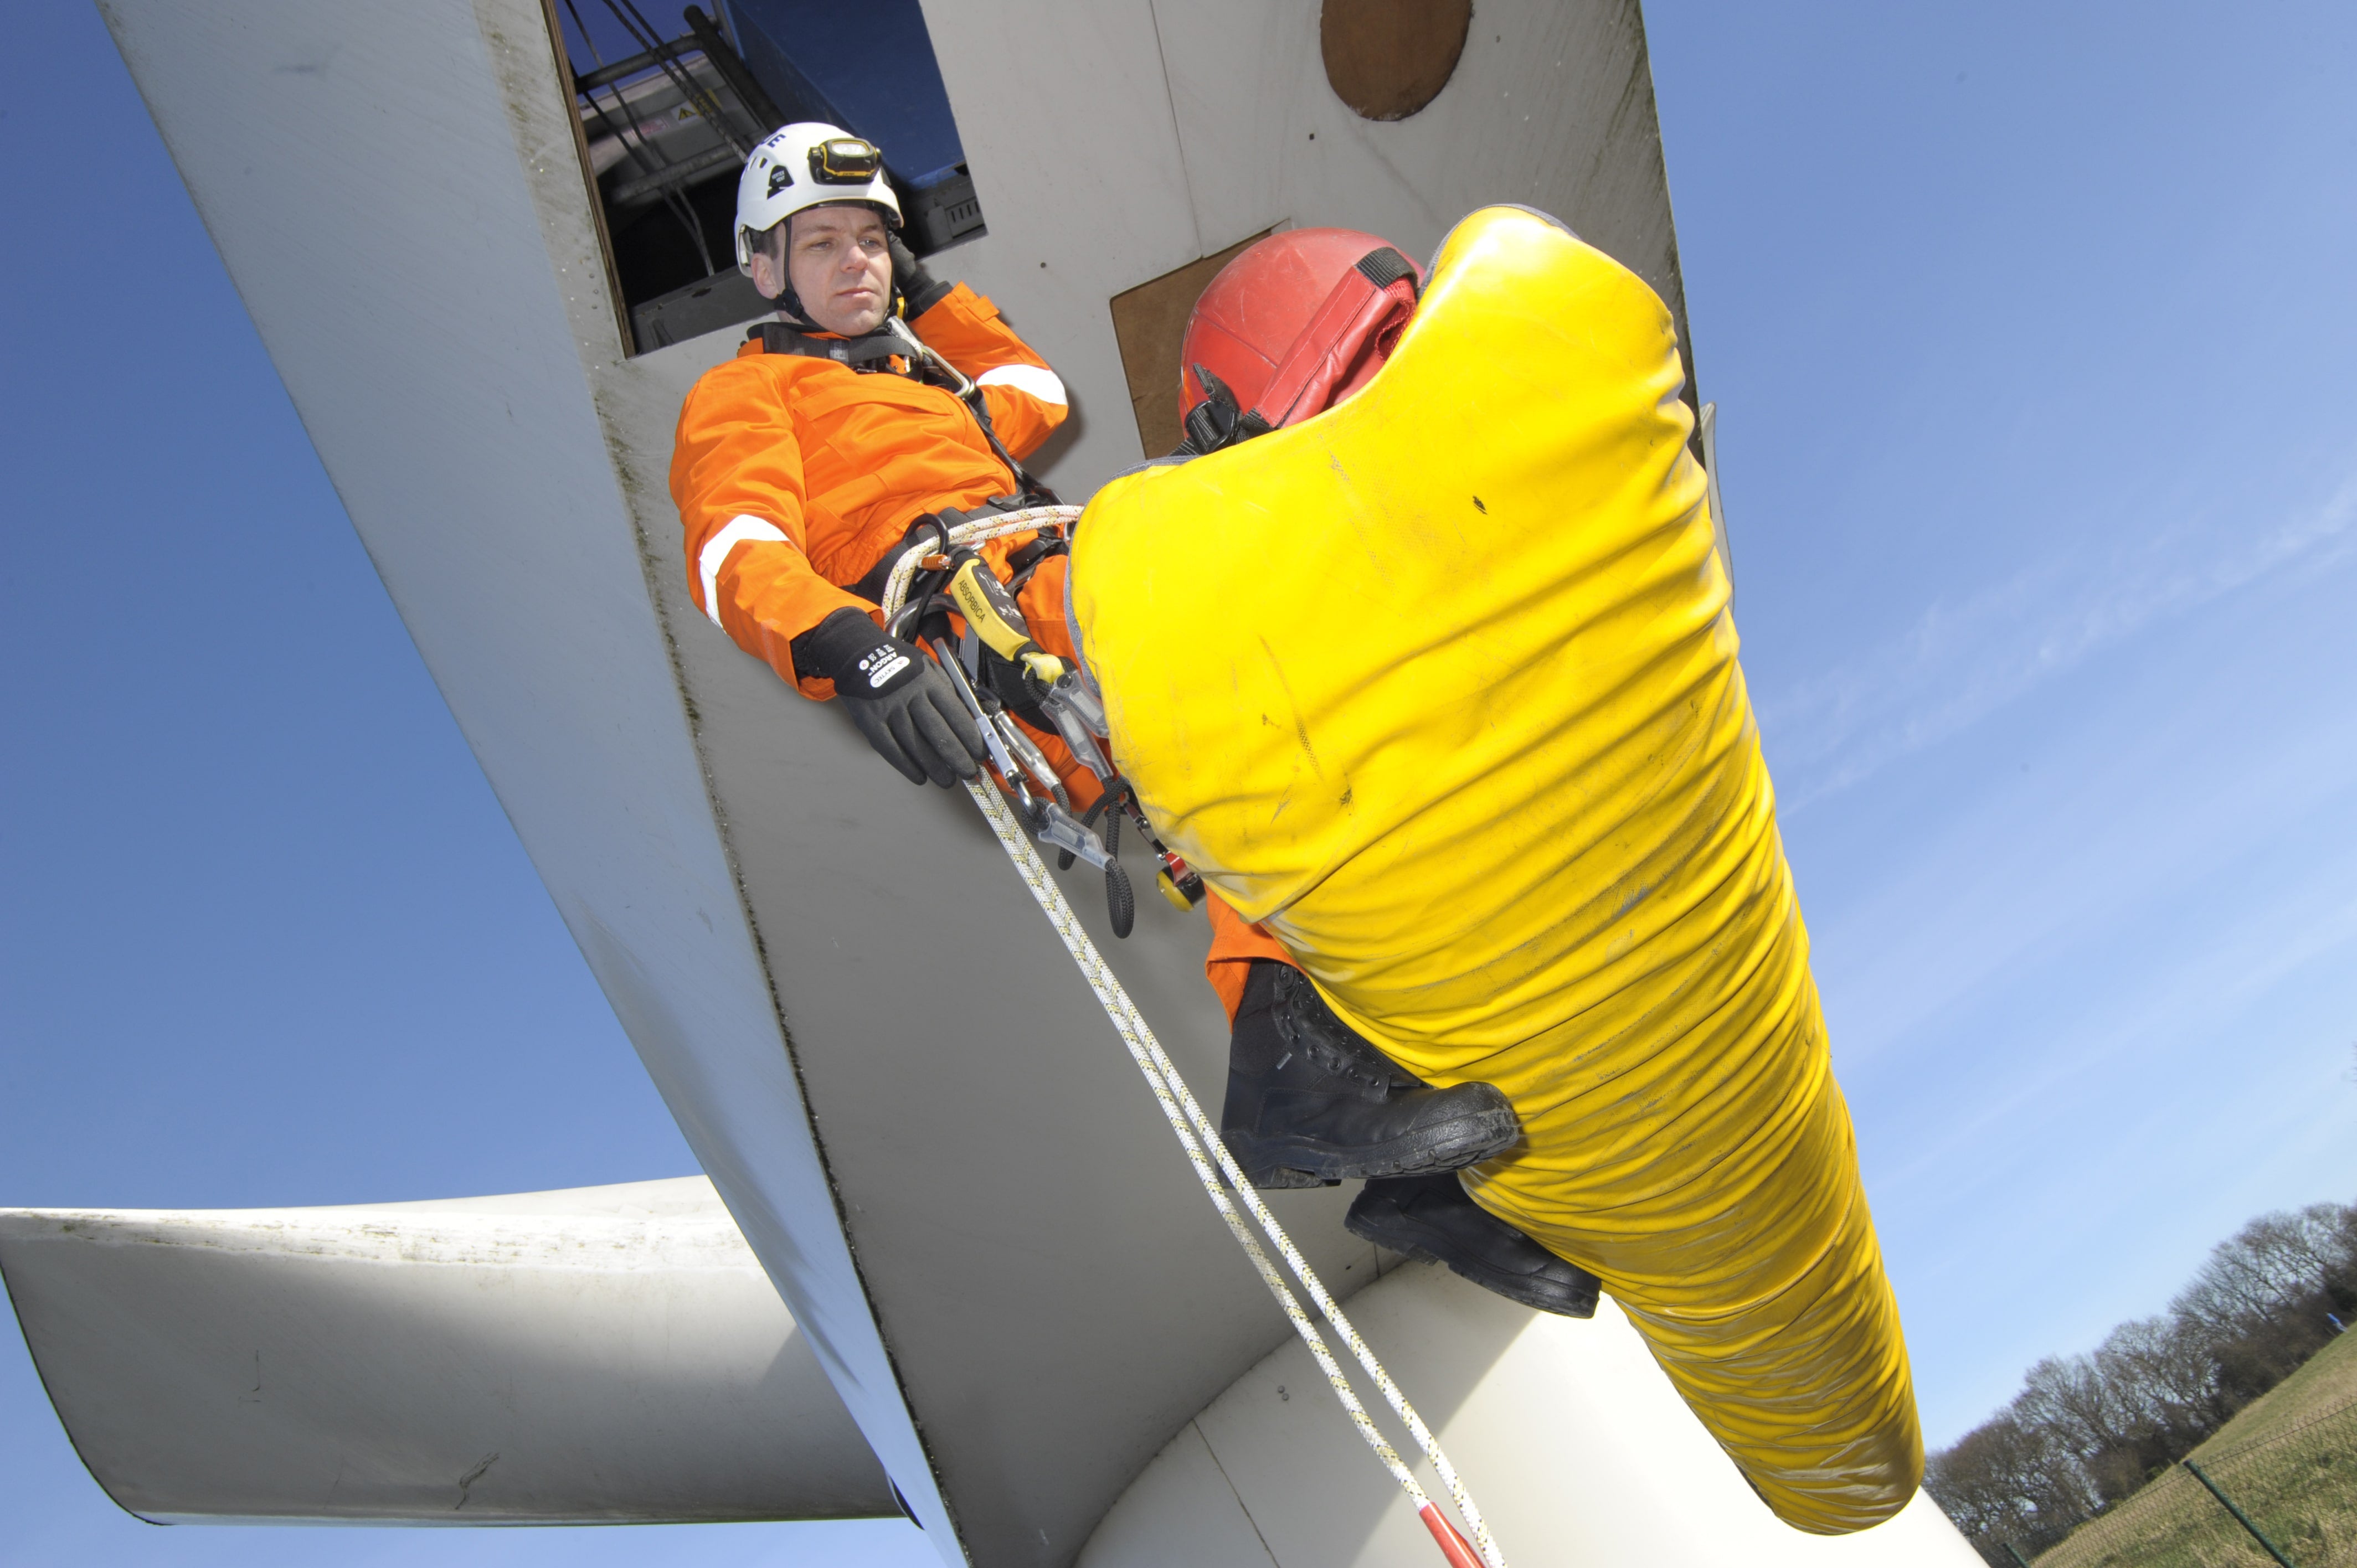 Assisted stretcher rescue from a wind turbine